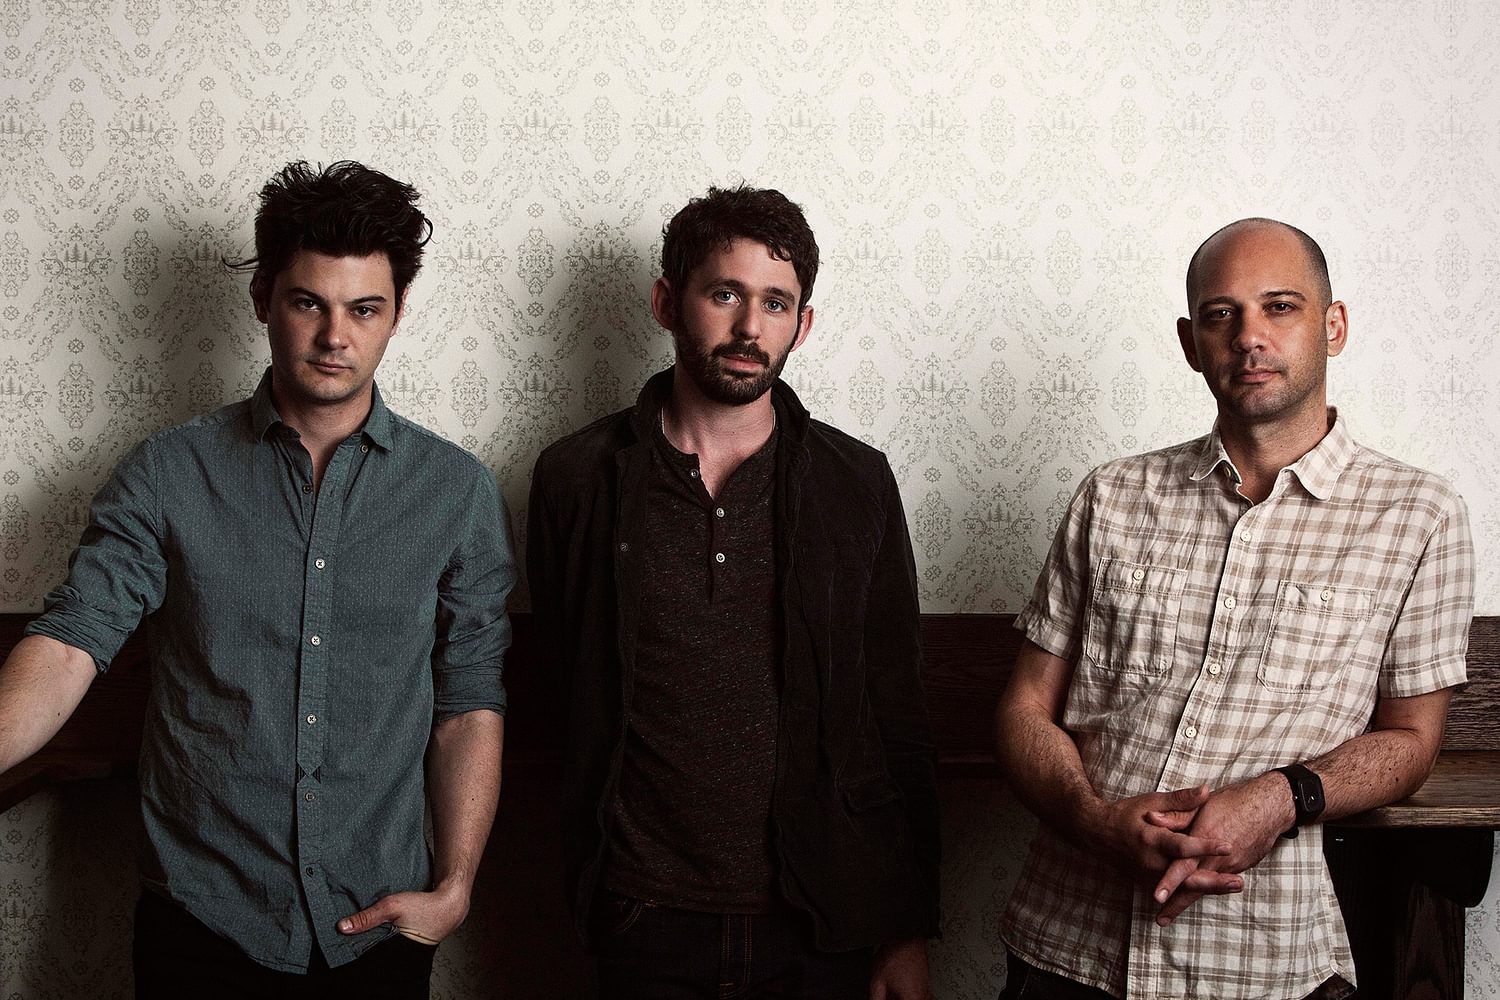 The Antlers: “The flaws are what make it human”